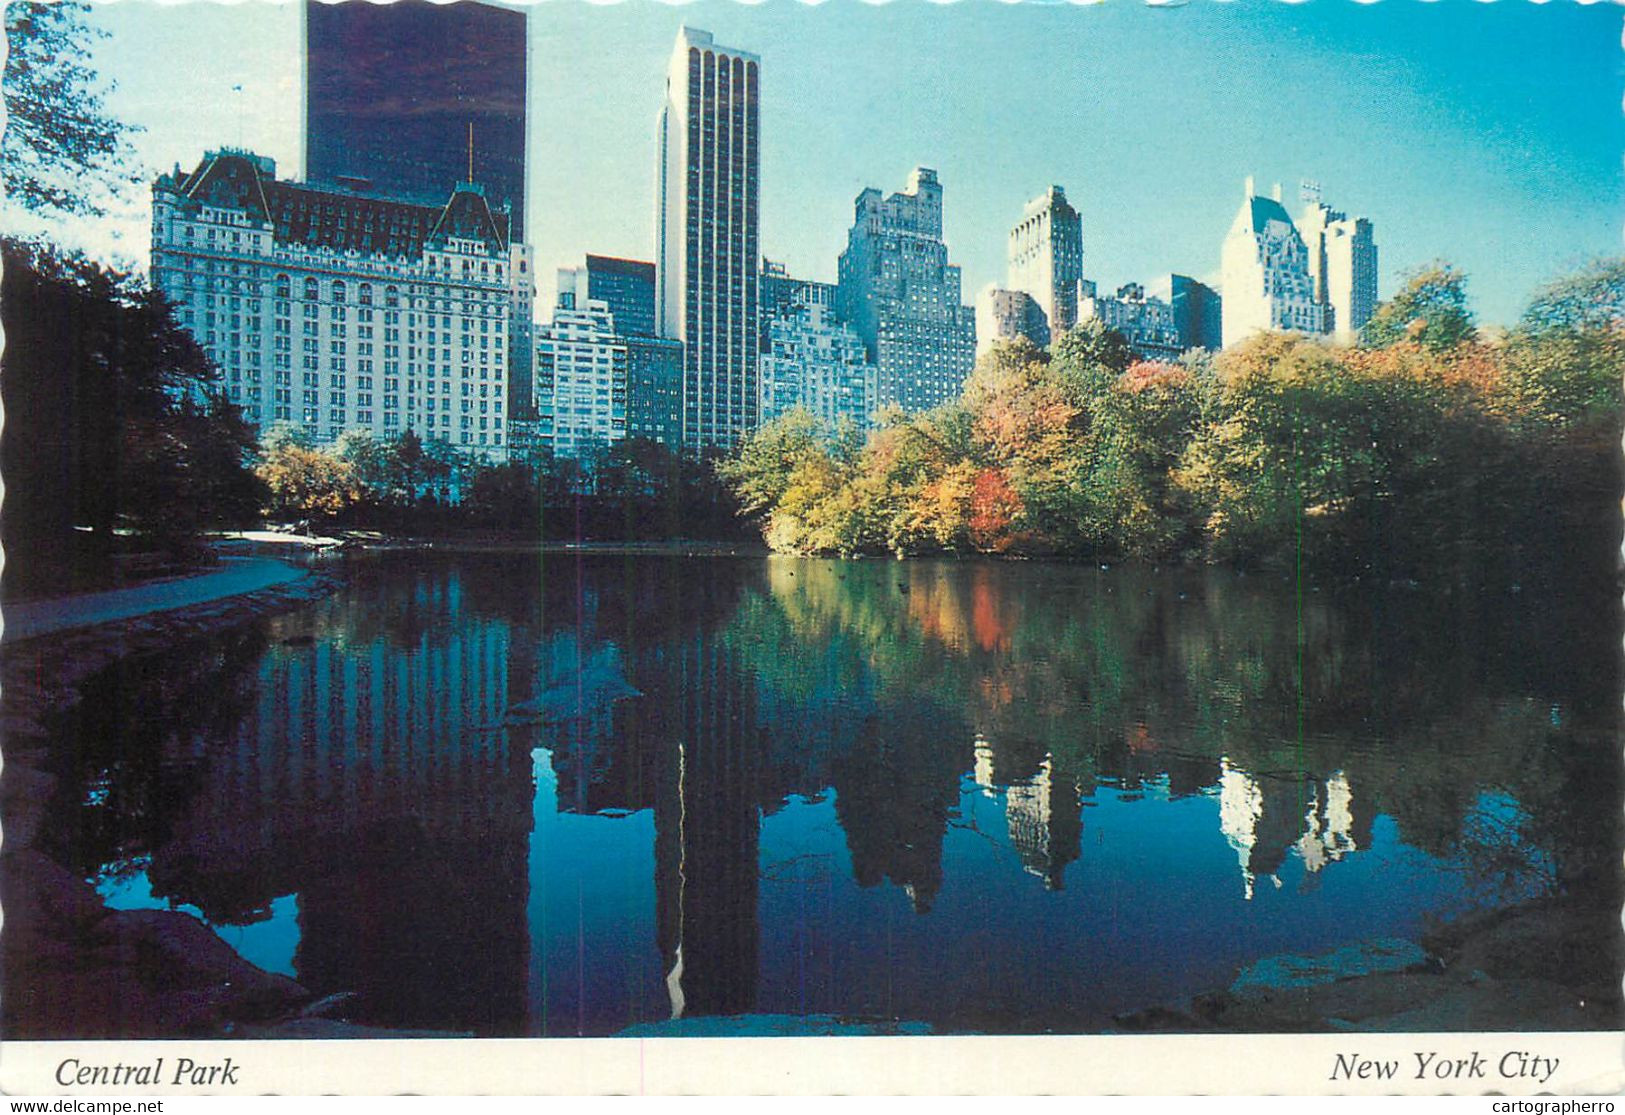 Postcard United States > NY - New York > New York City > Central Park Hotels View 1979 - Central Park